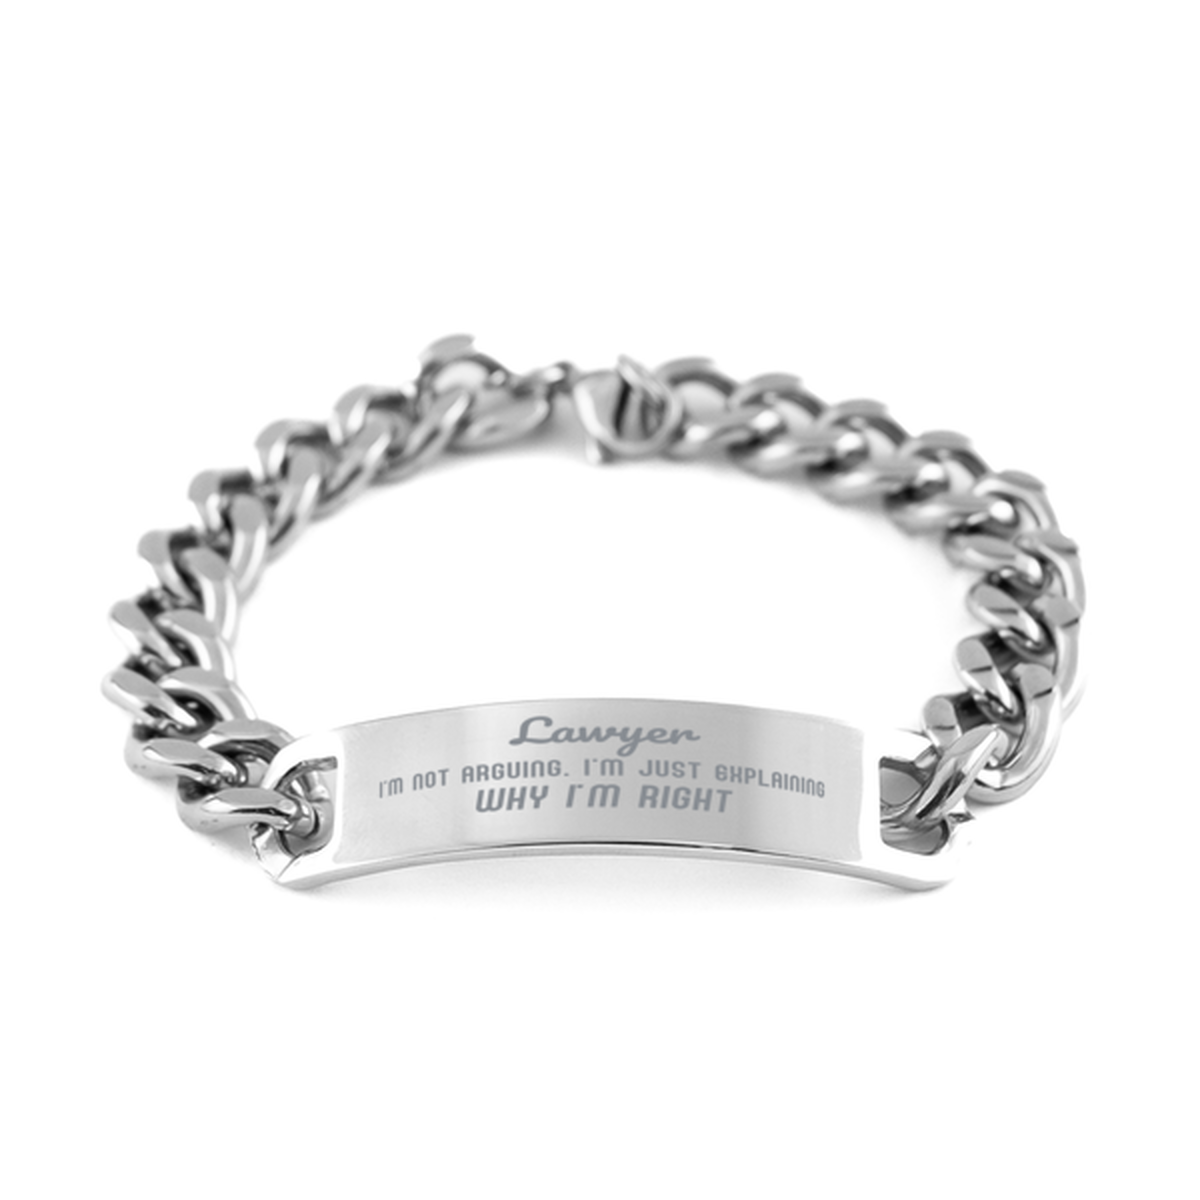 Lawyer I'm not Arguing. I'm Just Explaining Why I'm RIGHT Cuban Chain Stainless Steel Bracelet, Graduation Birthday Christmas Lawyer Gifts For Lawyer Funny Saying Quote Present for Men Women Coworker